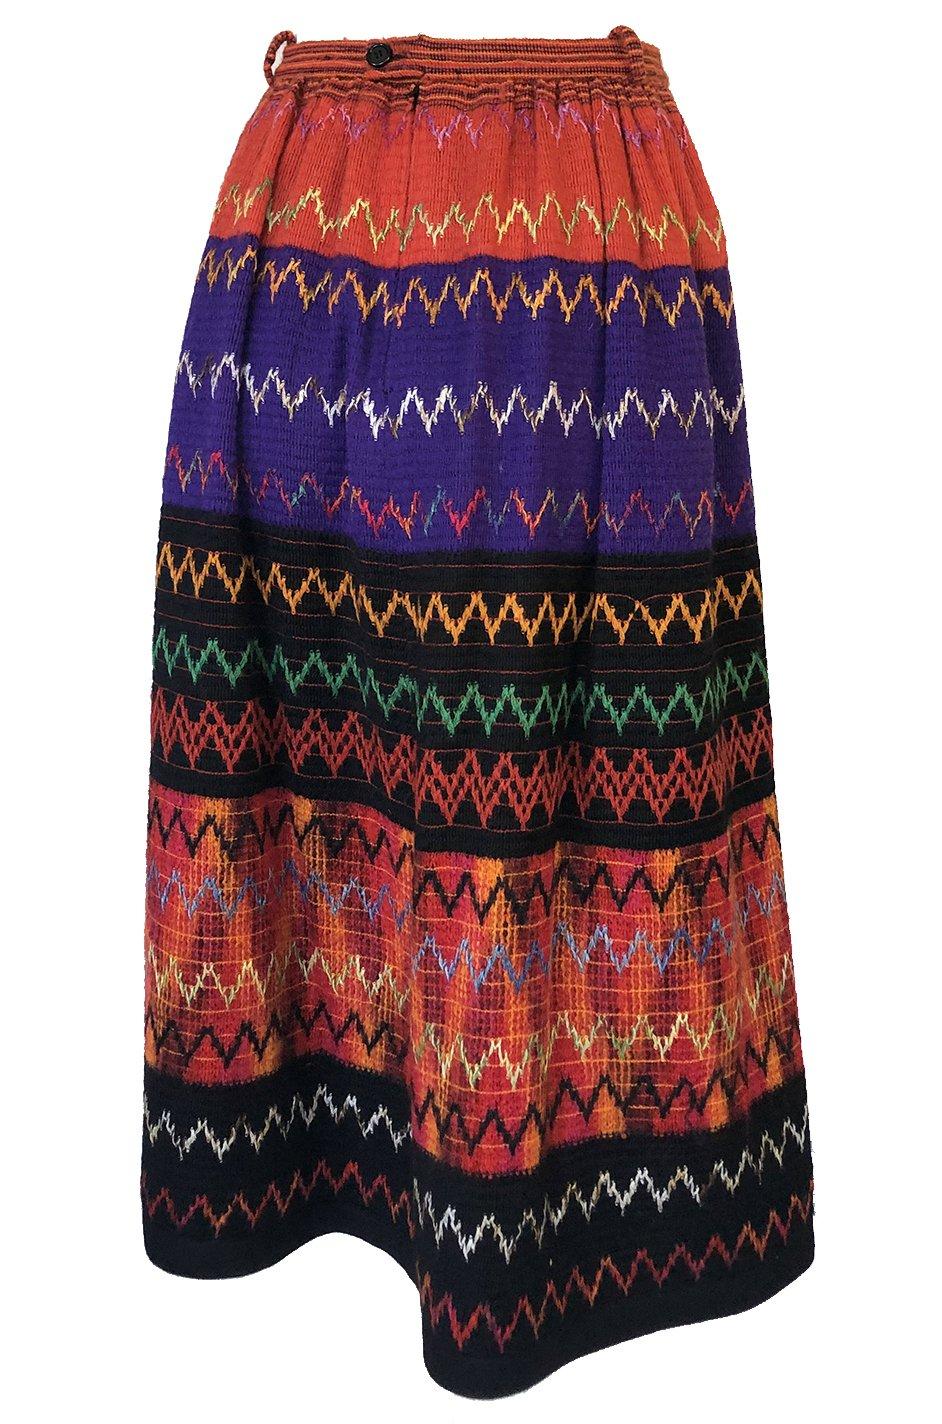 This Lanvin skirt is utterly fantastic and so unusual in its fabric choice. I am in absolute love with it. From the bold colours that have been used in its design, to the way the  the fabric has been created and to the the workmanship put into its